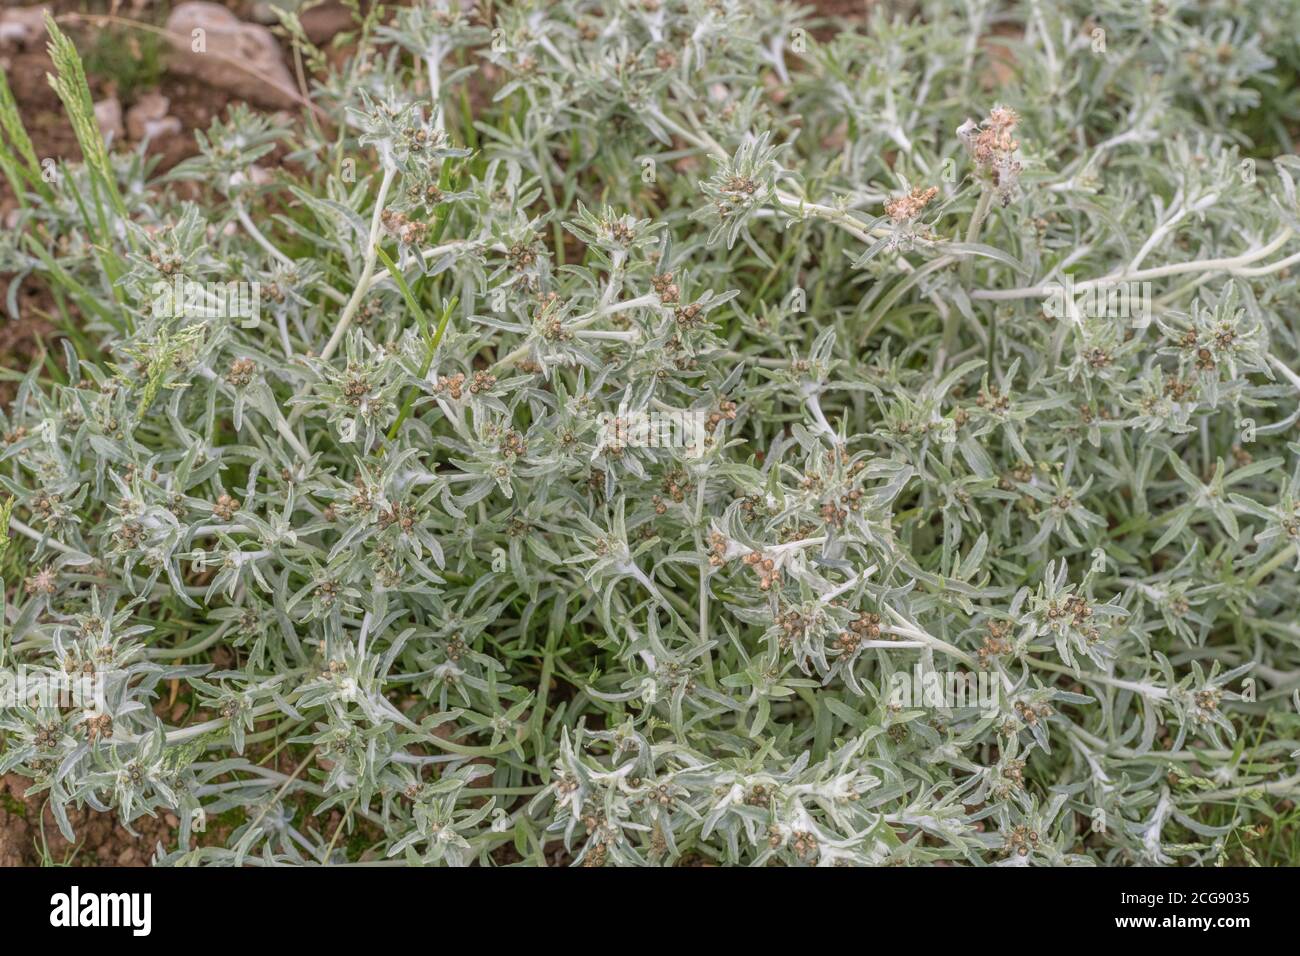 Leaves of Marsh Cudweed / Gnaphalium uliginosum growing in arable field among a potato crop. Common agricultural and arable farm weed. Medicinal herb. Stock Photo